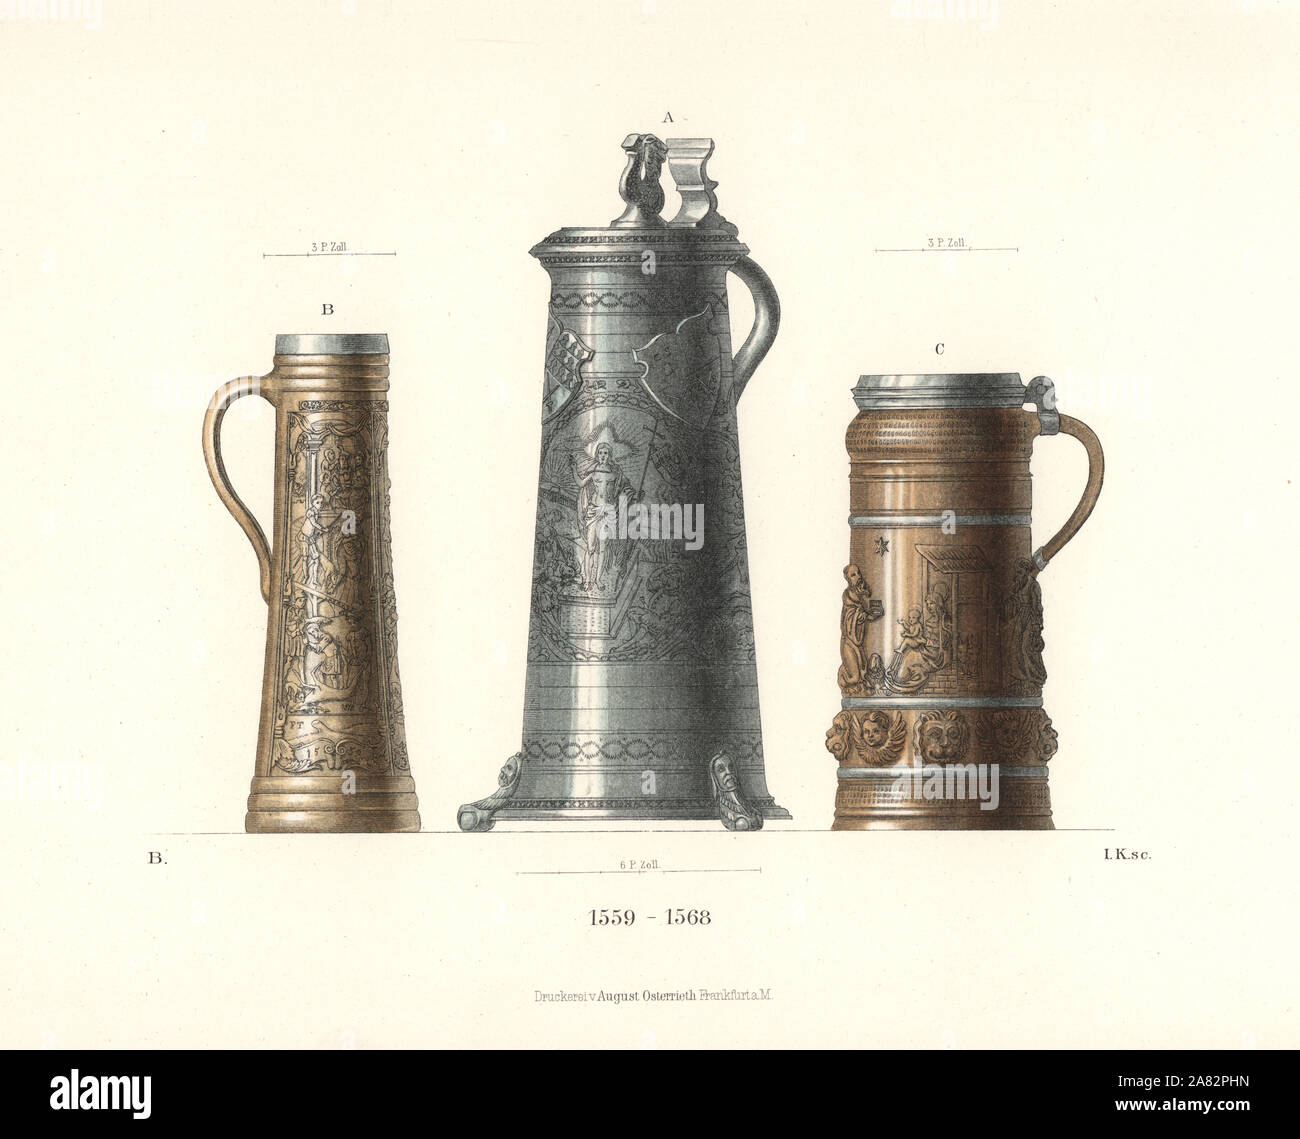 German pewter jugs and tankards from the later 16th century. Chromolithograph from Hefner-Alteneck's Costumes, Artworks and Appliances from the Middle Ages to the 17th Century, Frankfurt, 1889. Illustration by B, lithographed by Heinrich Keller. Dr. Hefner-Alteneck (1811-1903) was a German museum curator, archaeologist, art historian, illustrator and etcher. Stock Photo